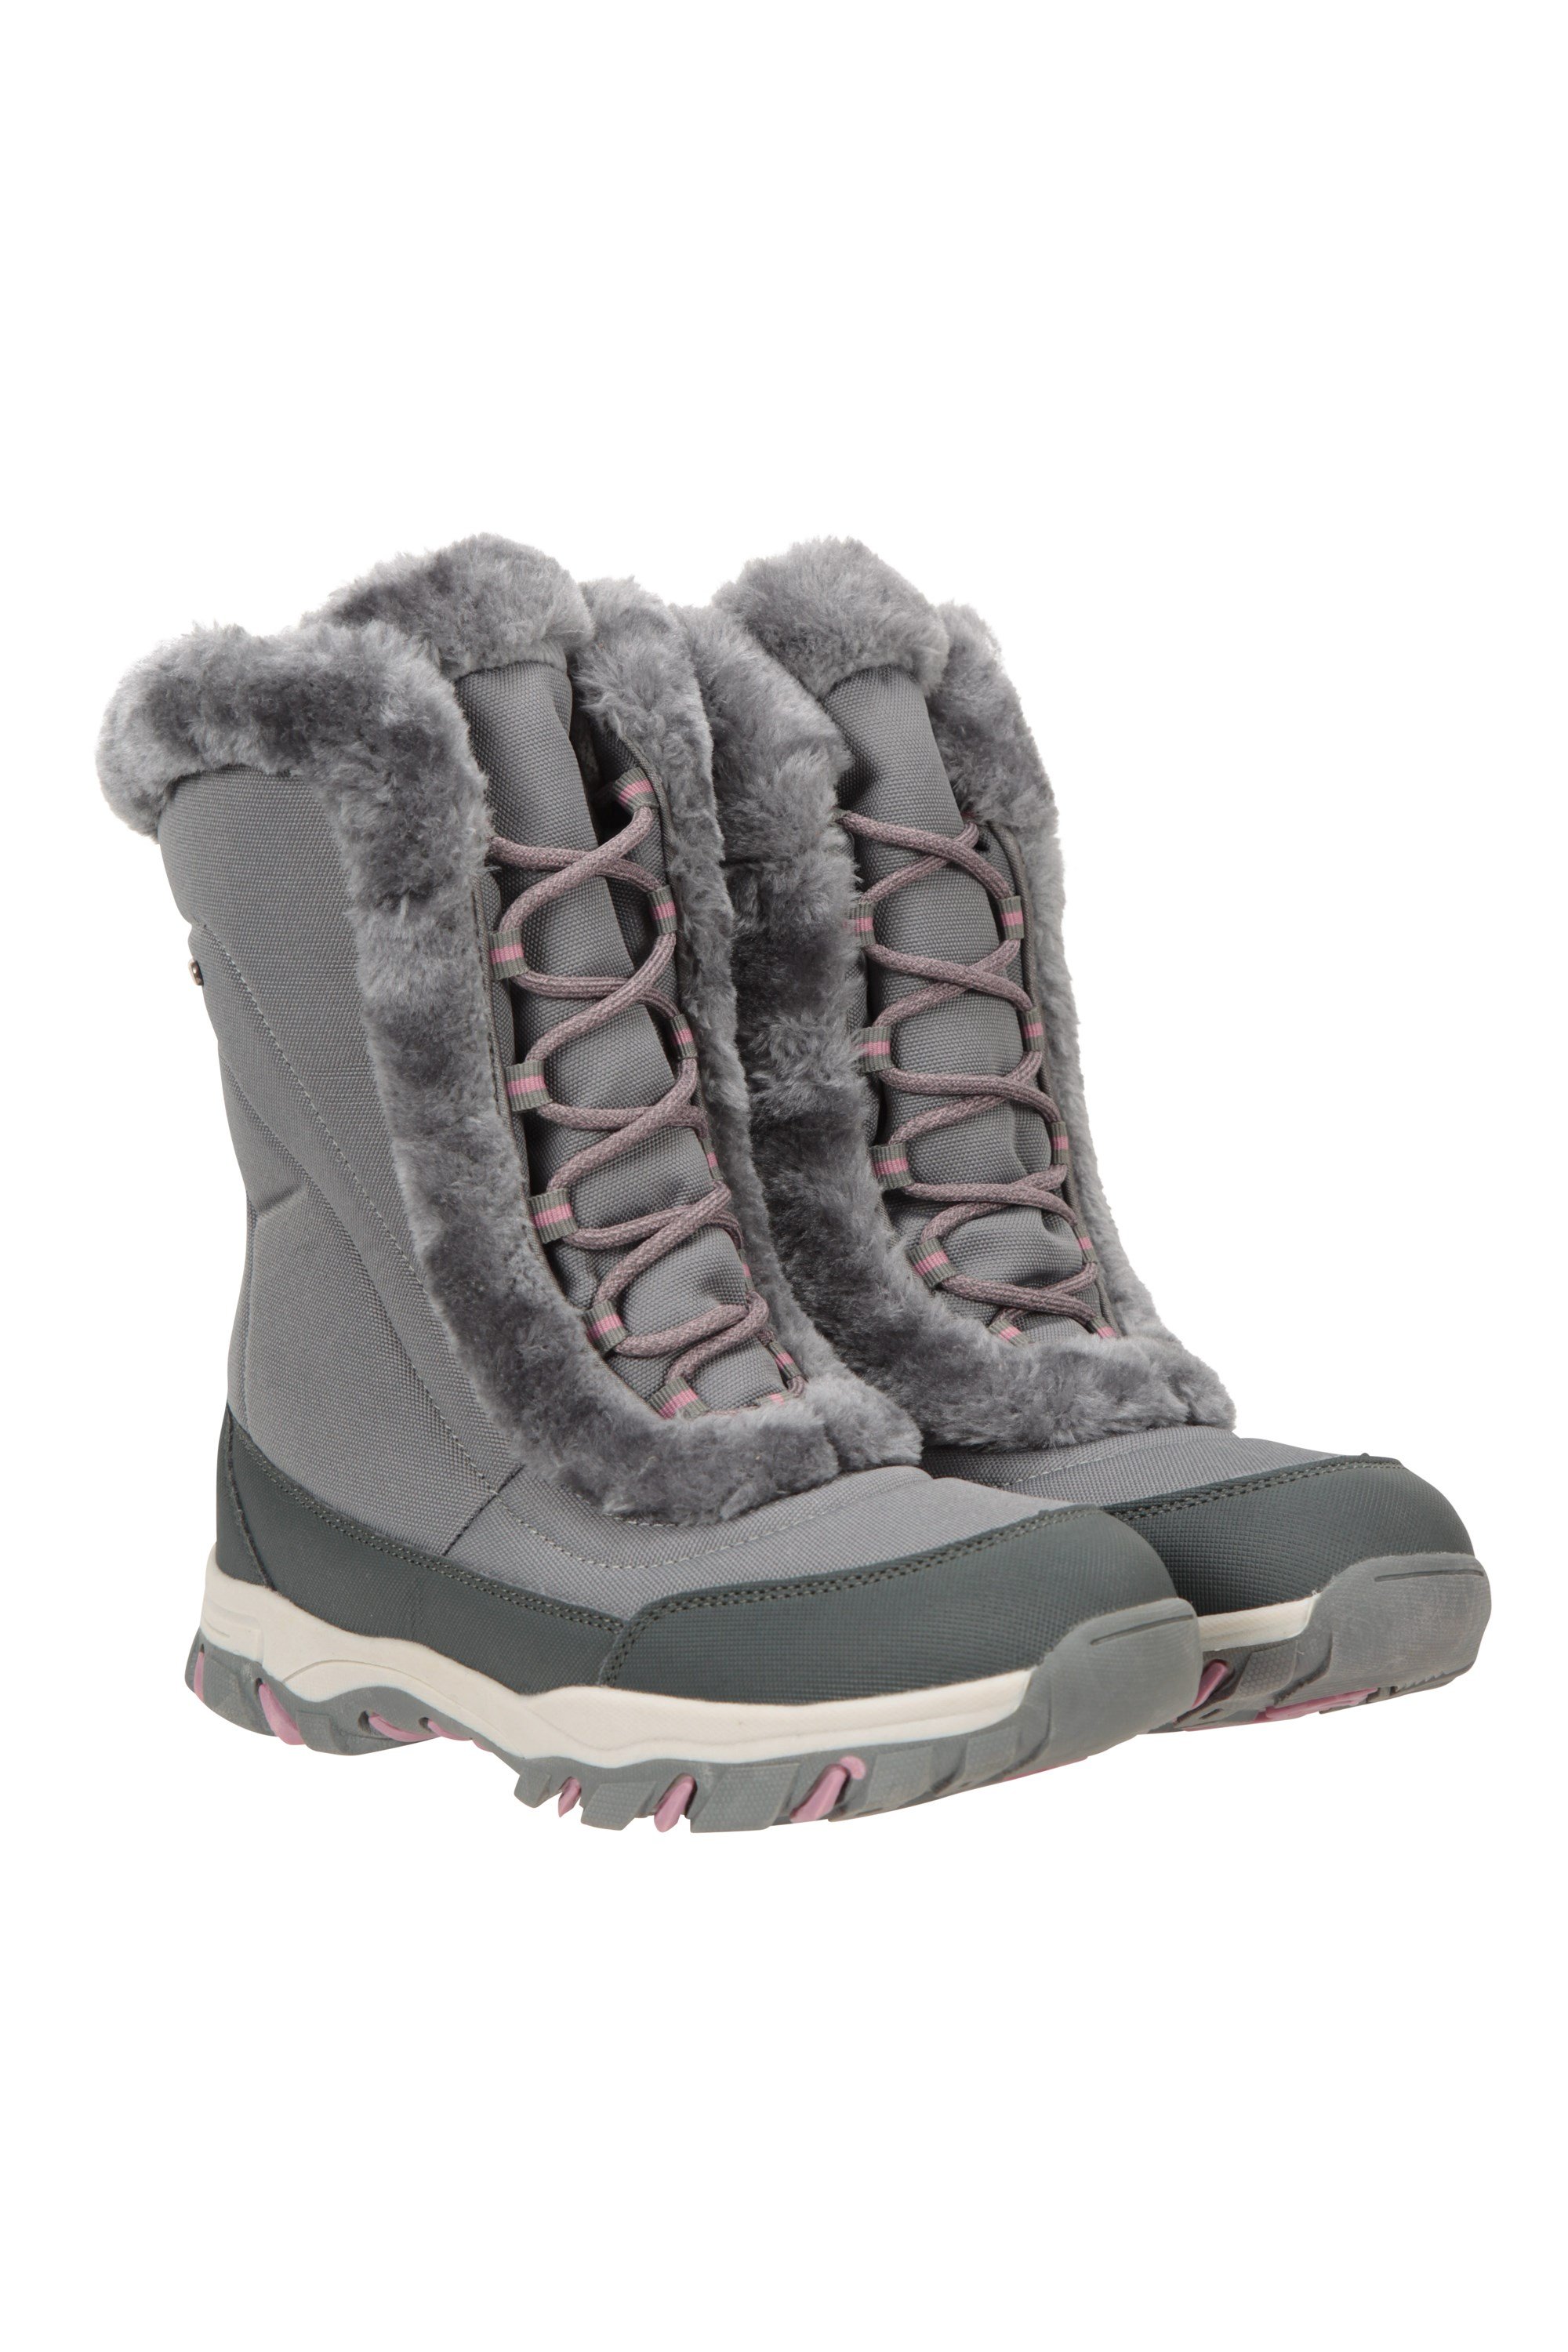 https://img.cdn.mountainwarehouse.com/product/023147/023147_lkh_ohio_womens_thermal_fleece_lined_snow_boot_ftw_aw21_double_01.jpg